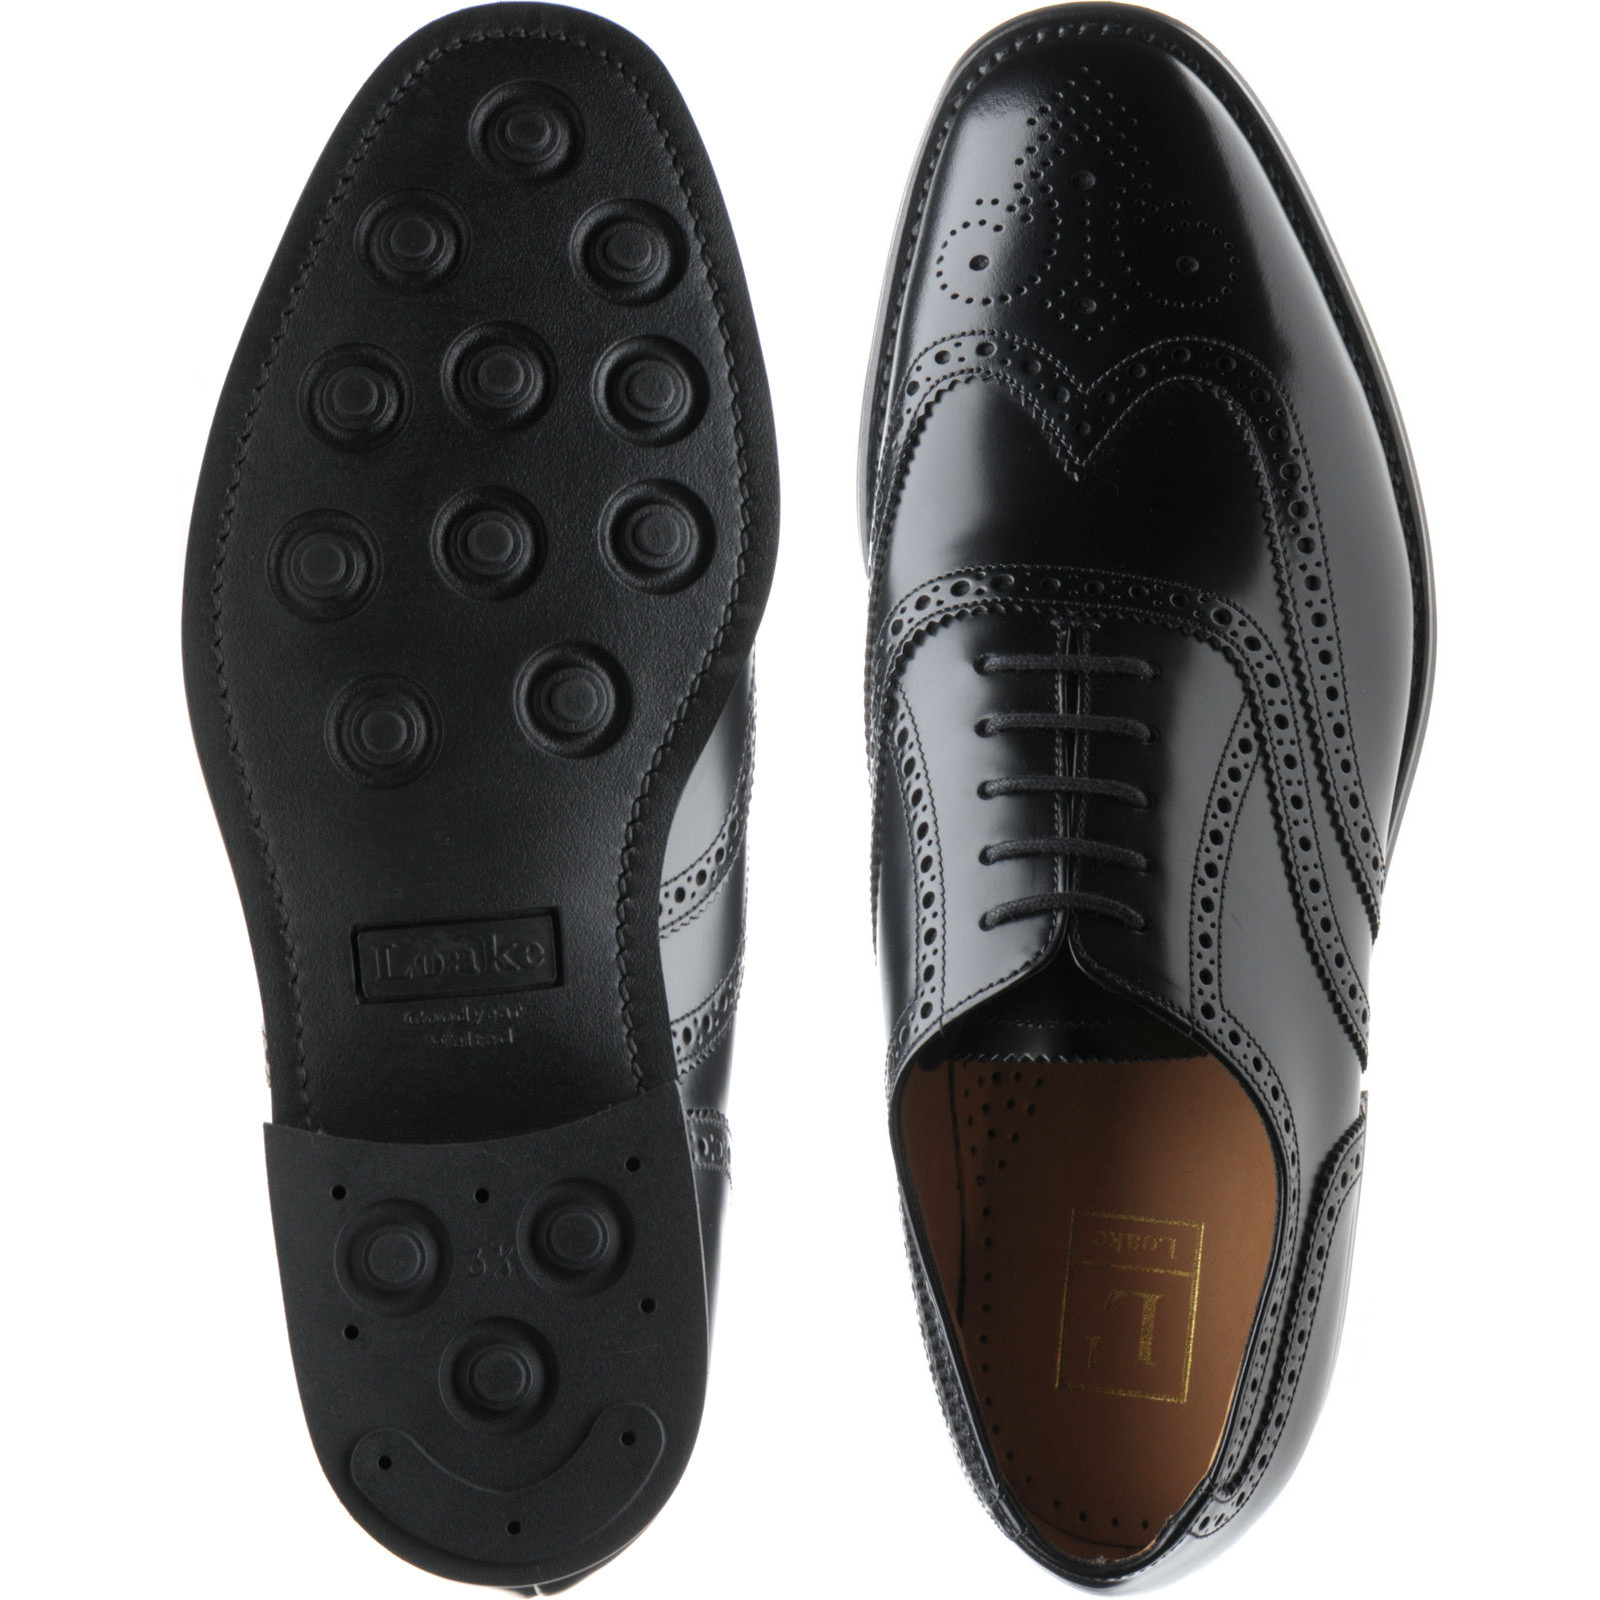 Loake shoes | Loake Professional | 302 rubber-soled brogues in Black ...